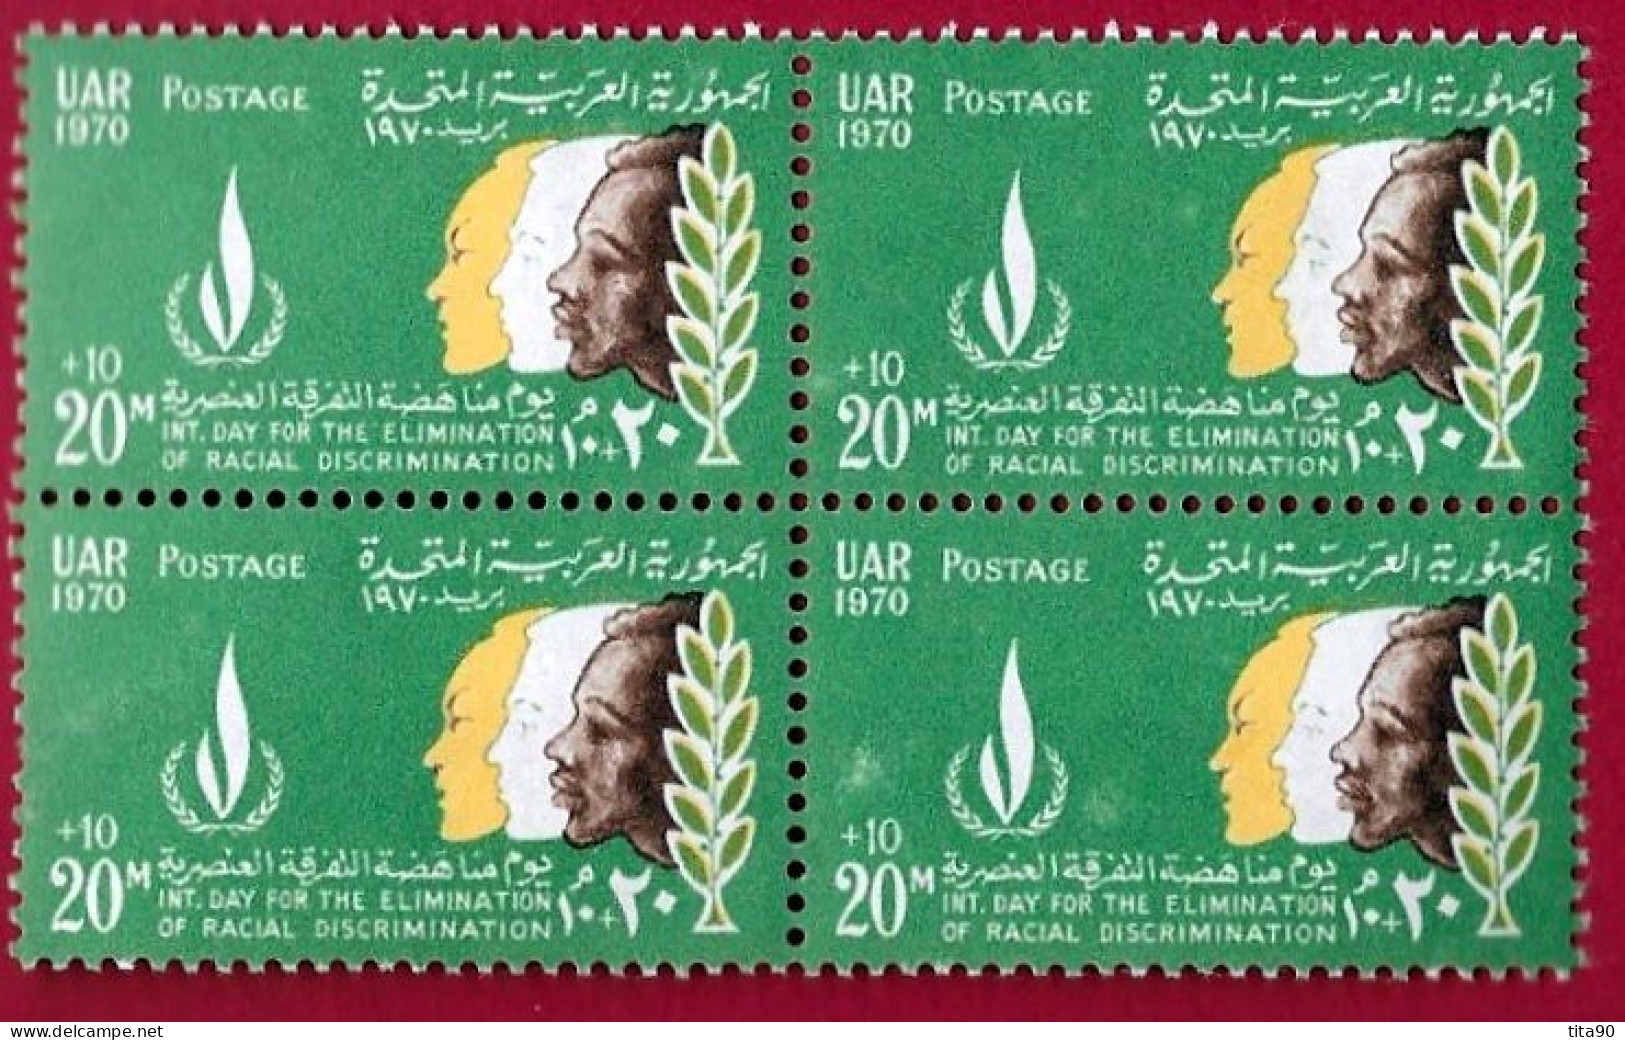 Egypte - Egypt 1970  Block Of 4 MNH   20m + 10m Racial Equality Day - Neufs